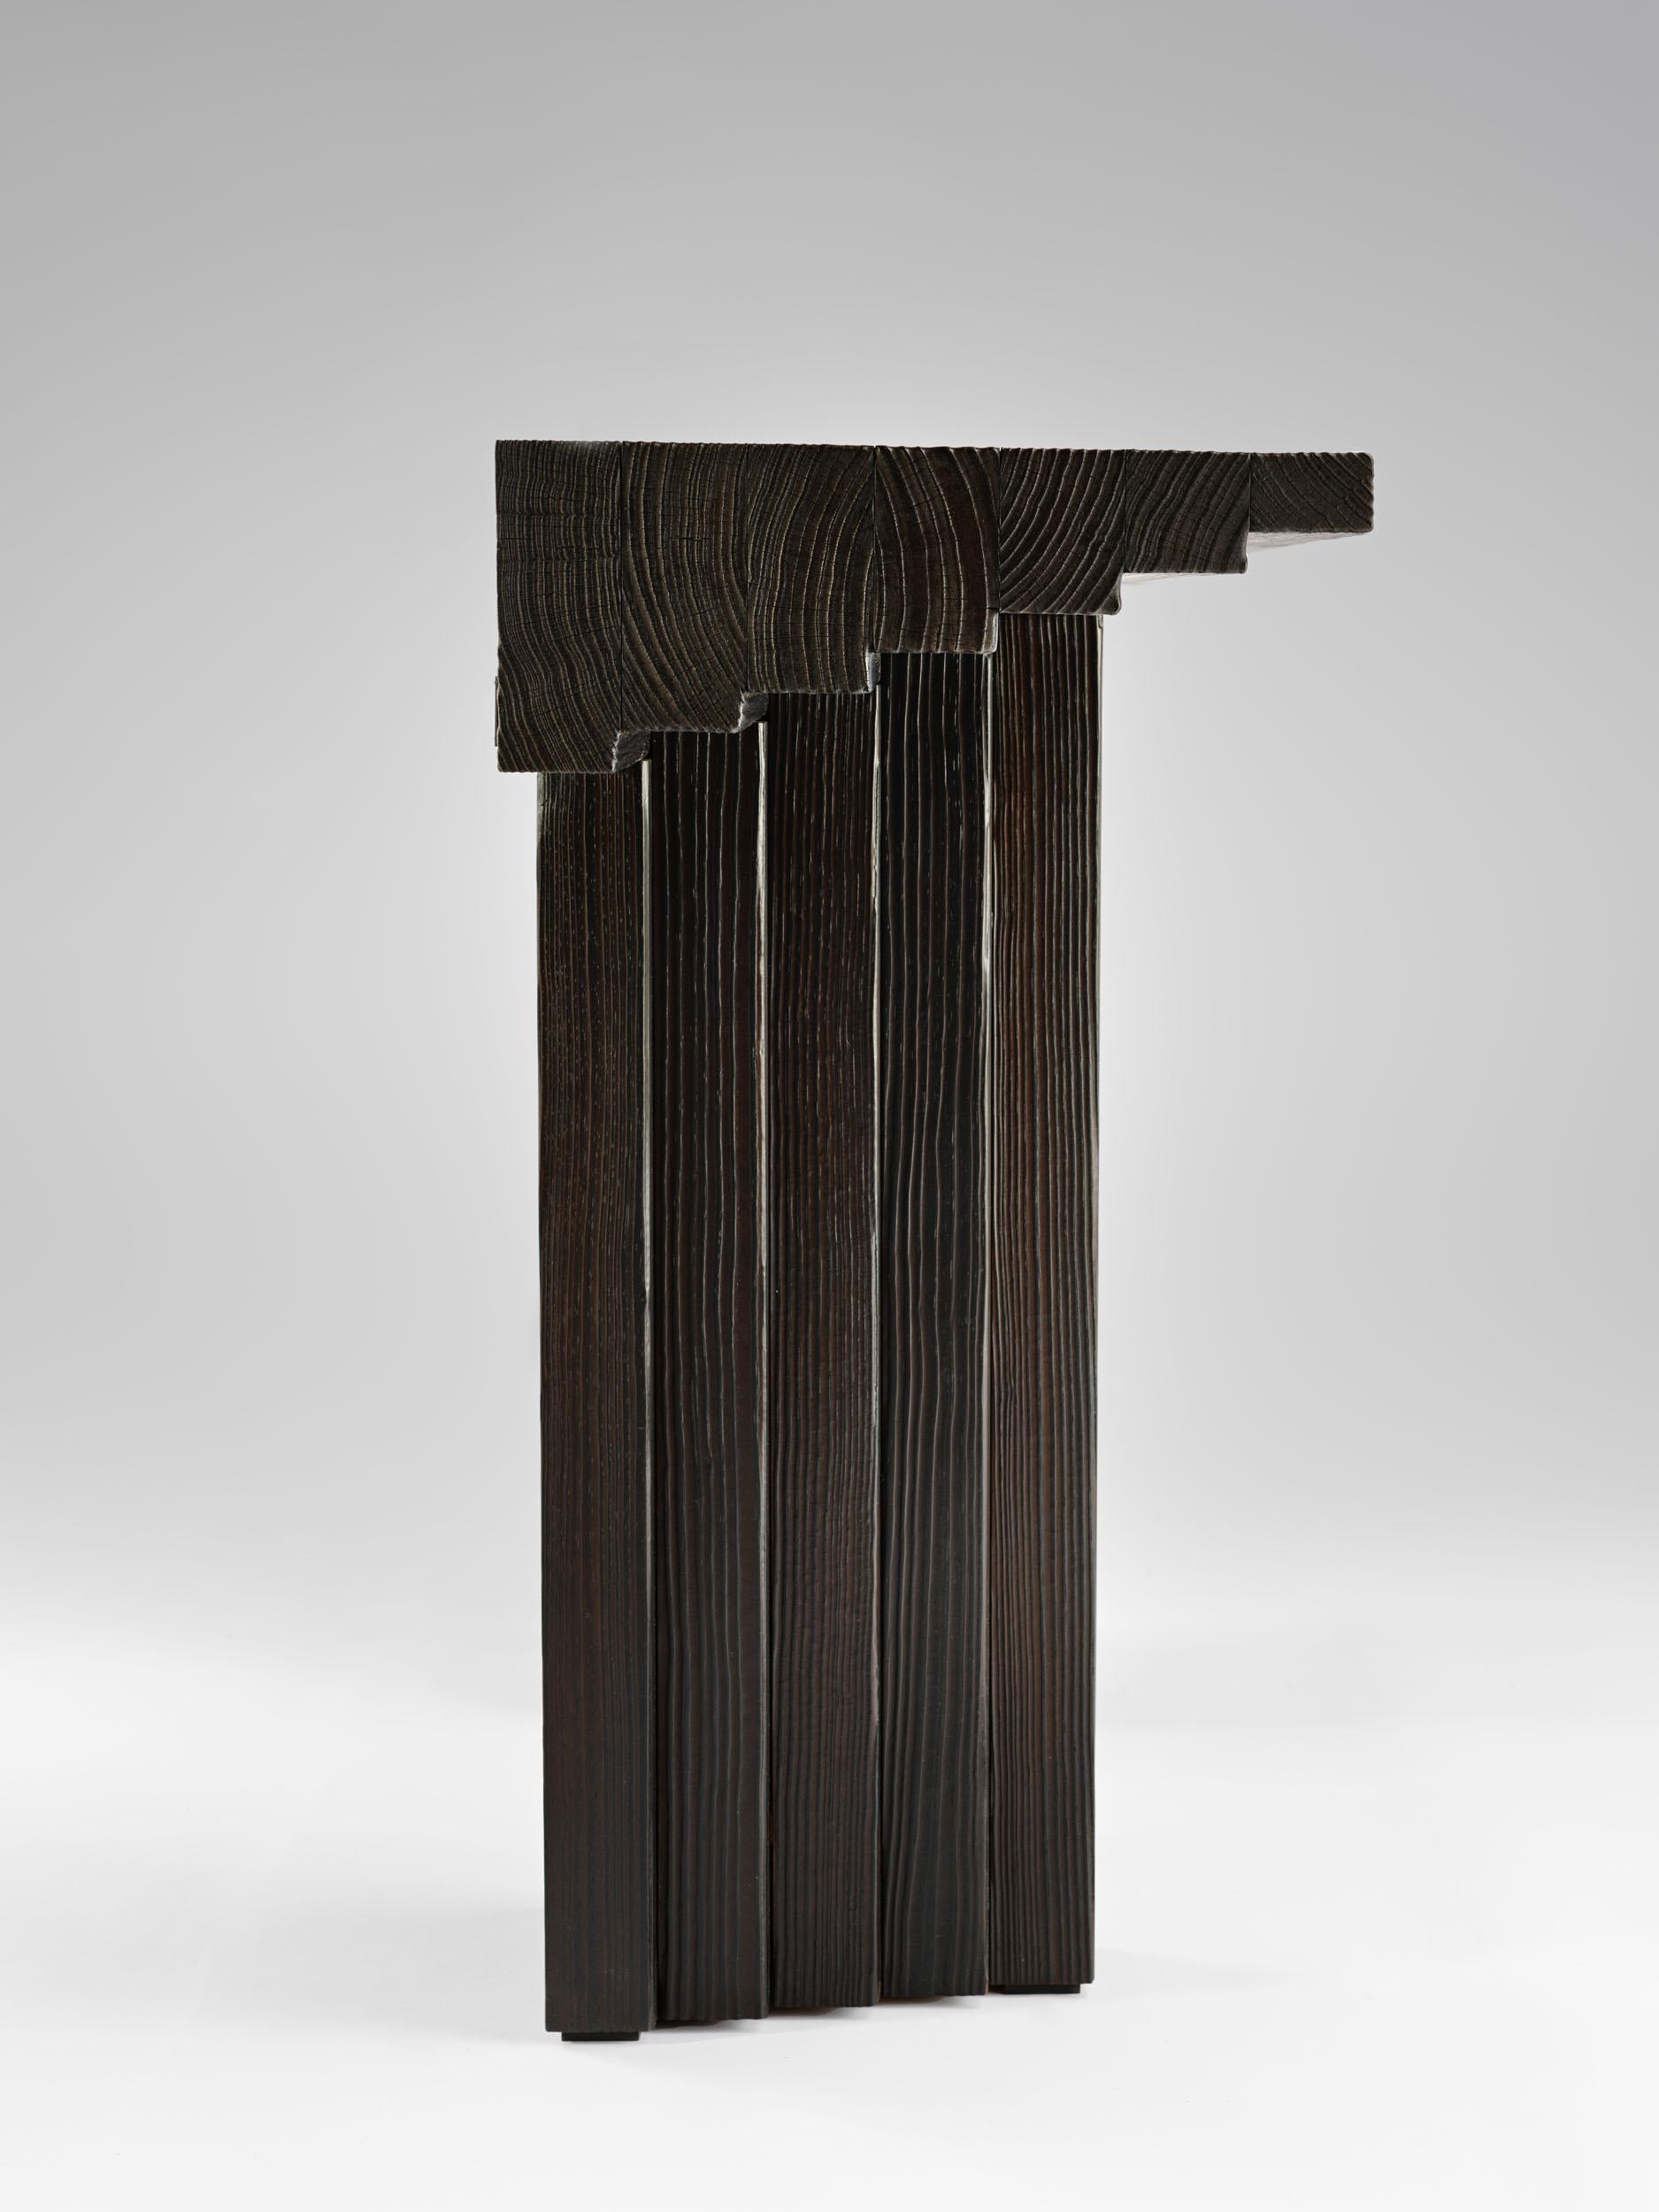 Contemporary black ‘Shou Sugi Ban’ burned solid wood Ater console by Tim Vranken For Sale 5